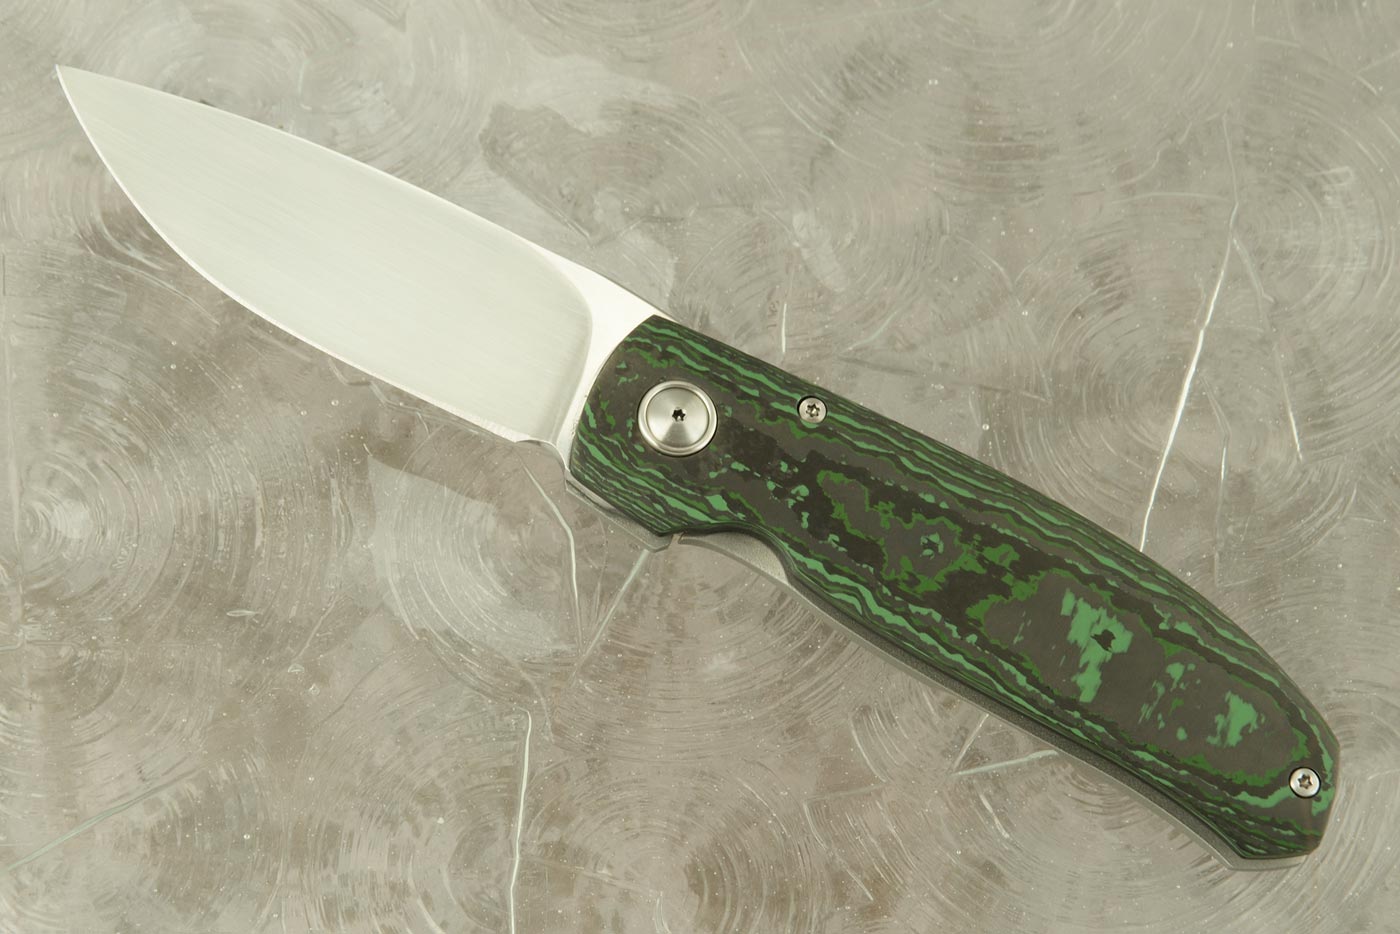 CPK1 Front Flipper with Jungle Green FatCarbon (Ceramic Bearings) - M390